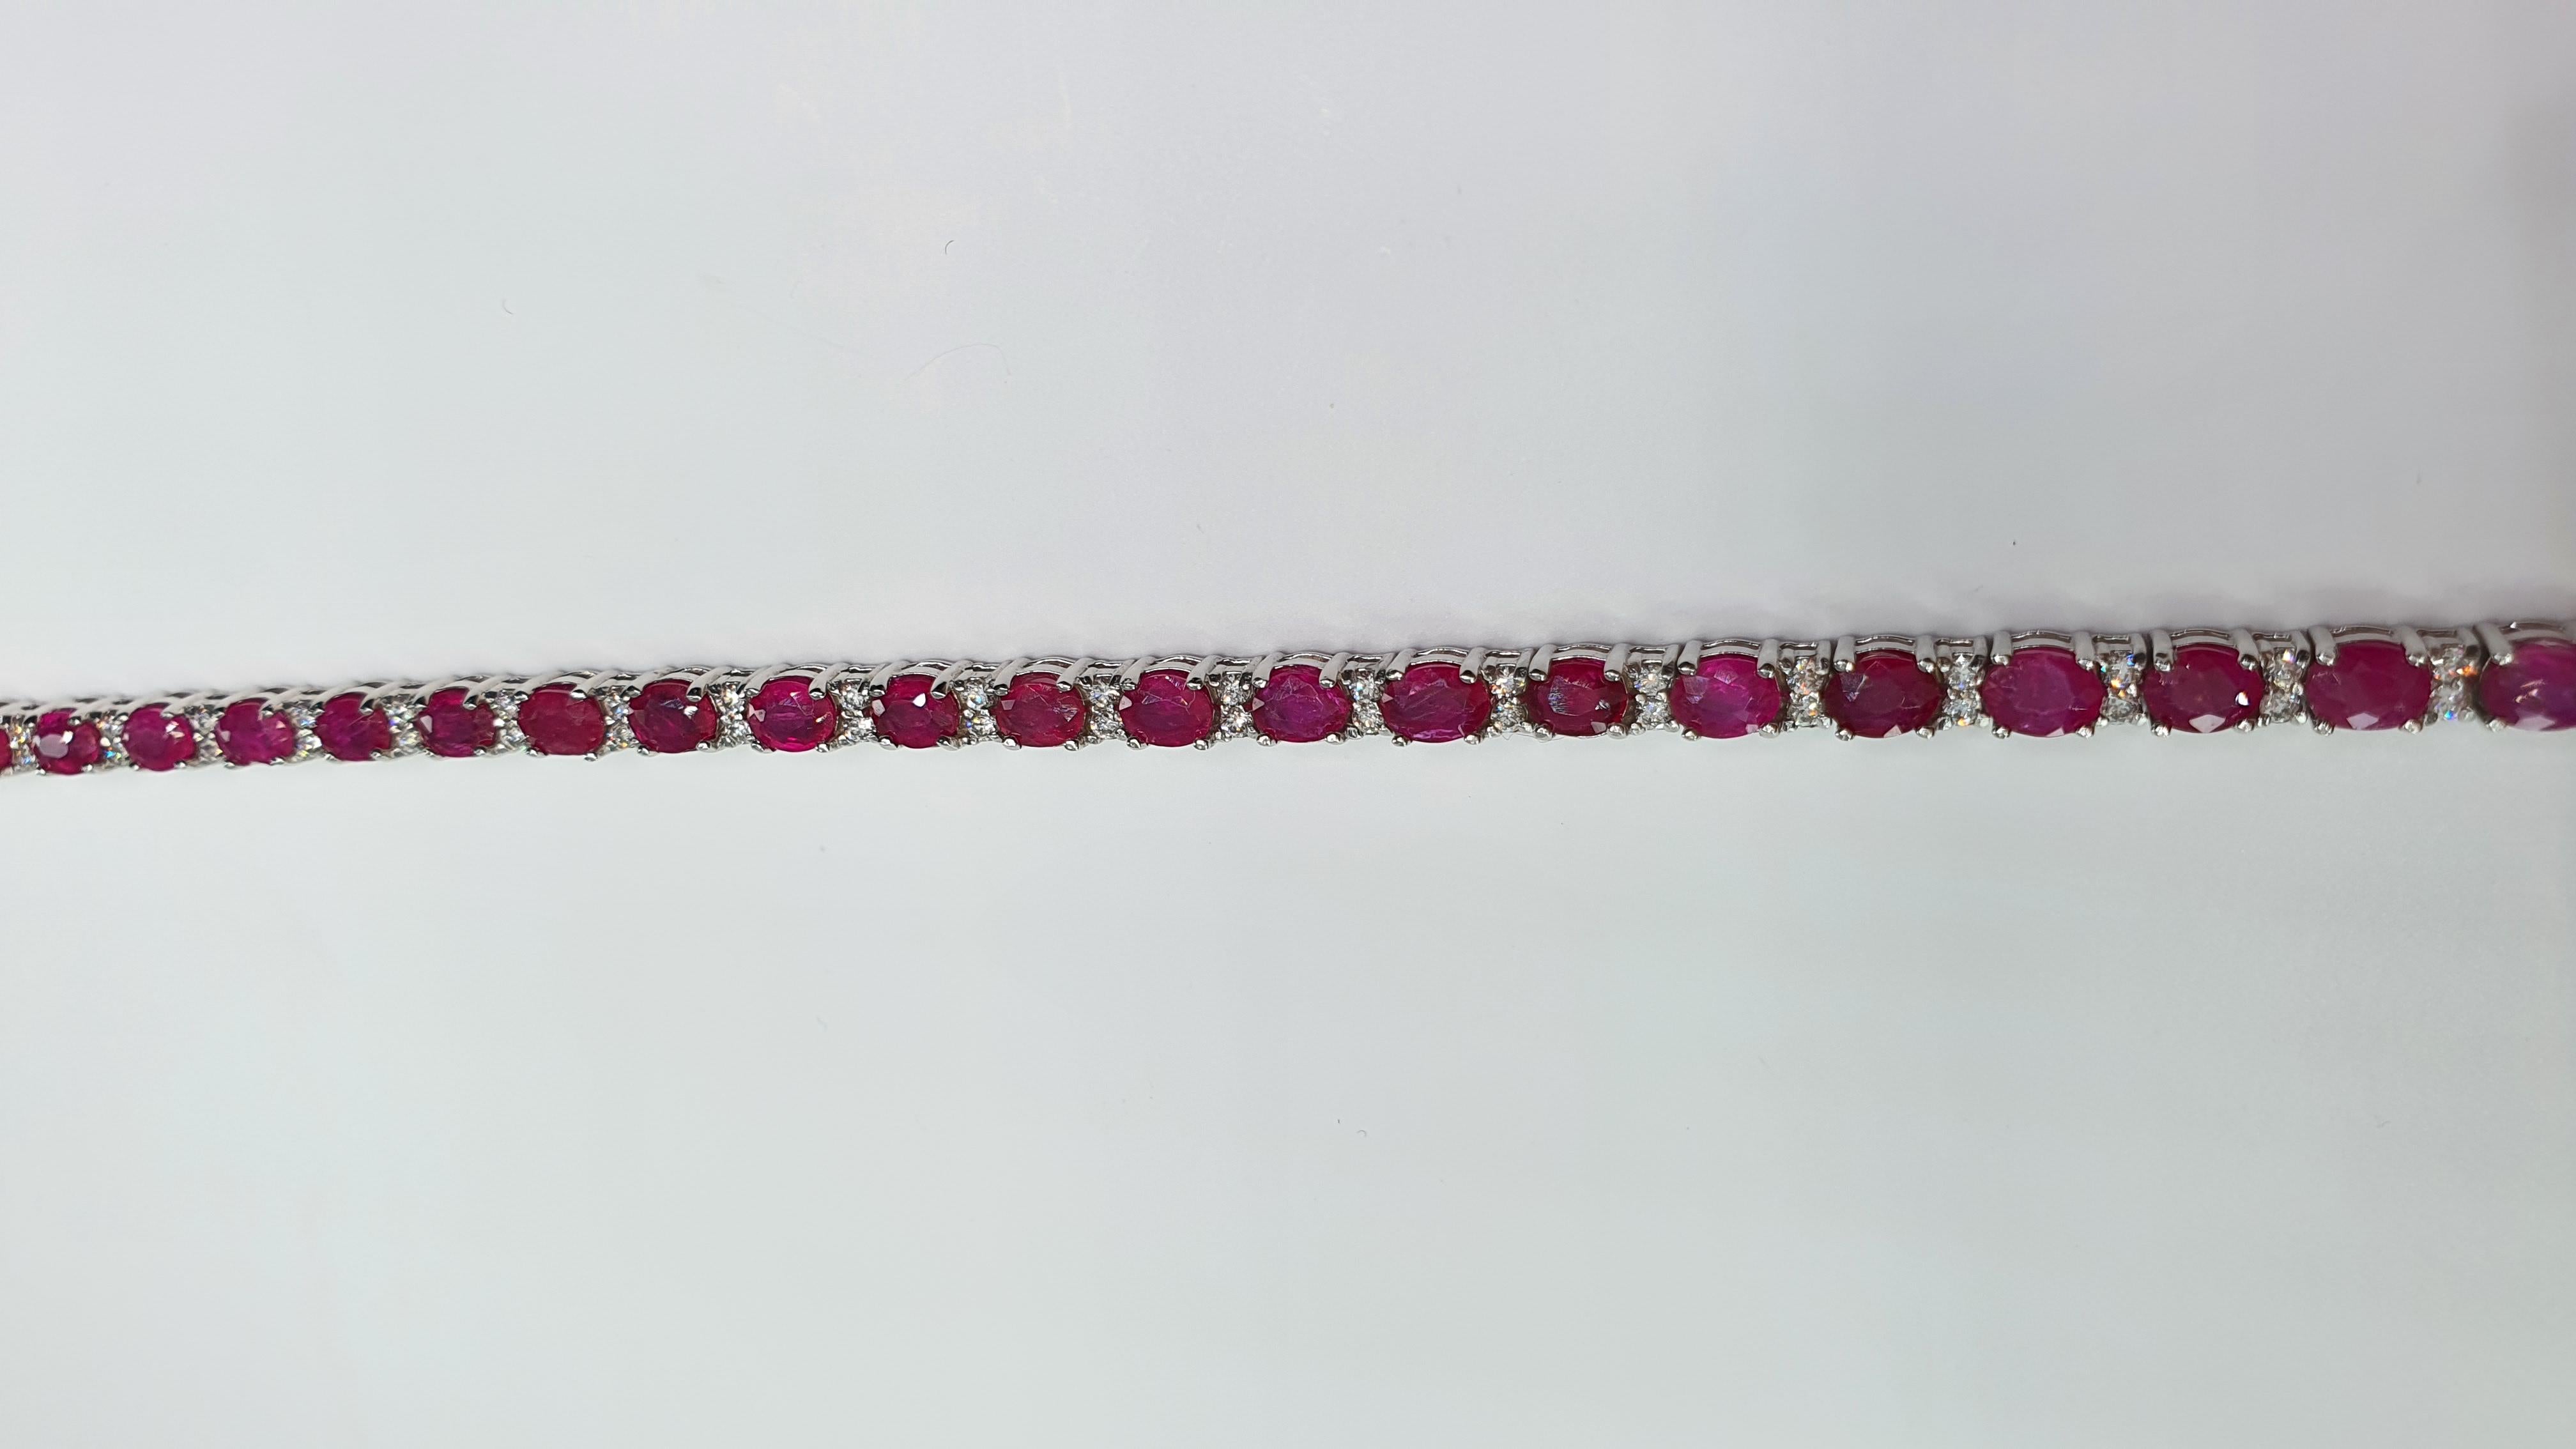 14 Carat Ruby Diamond 18K White Gold Tennis Bracelet

Stamped: 18K
Total Bracelet Weight: 12 Grams
Bracelet Length: 7.5 Inches
Ruby Weight: 13.00 Carat (5.00x4.00 Millimeter)
Diamond Weight: 1.00 Carat (F-G Color, VS2-SI1 Clarity
Face Measures: 4.00